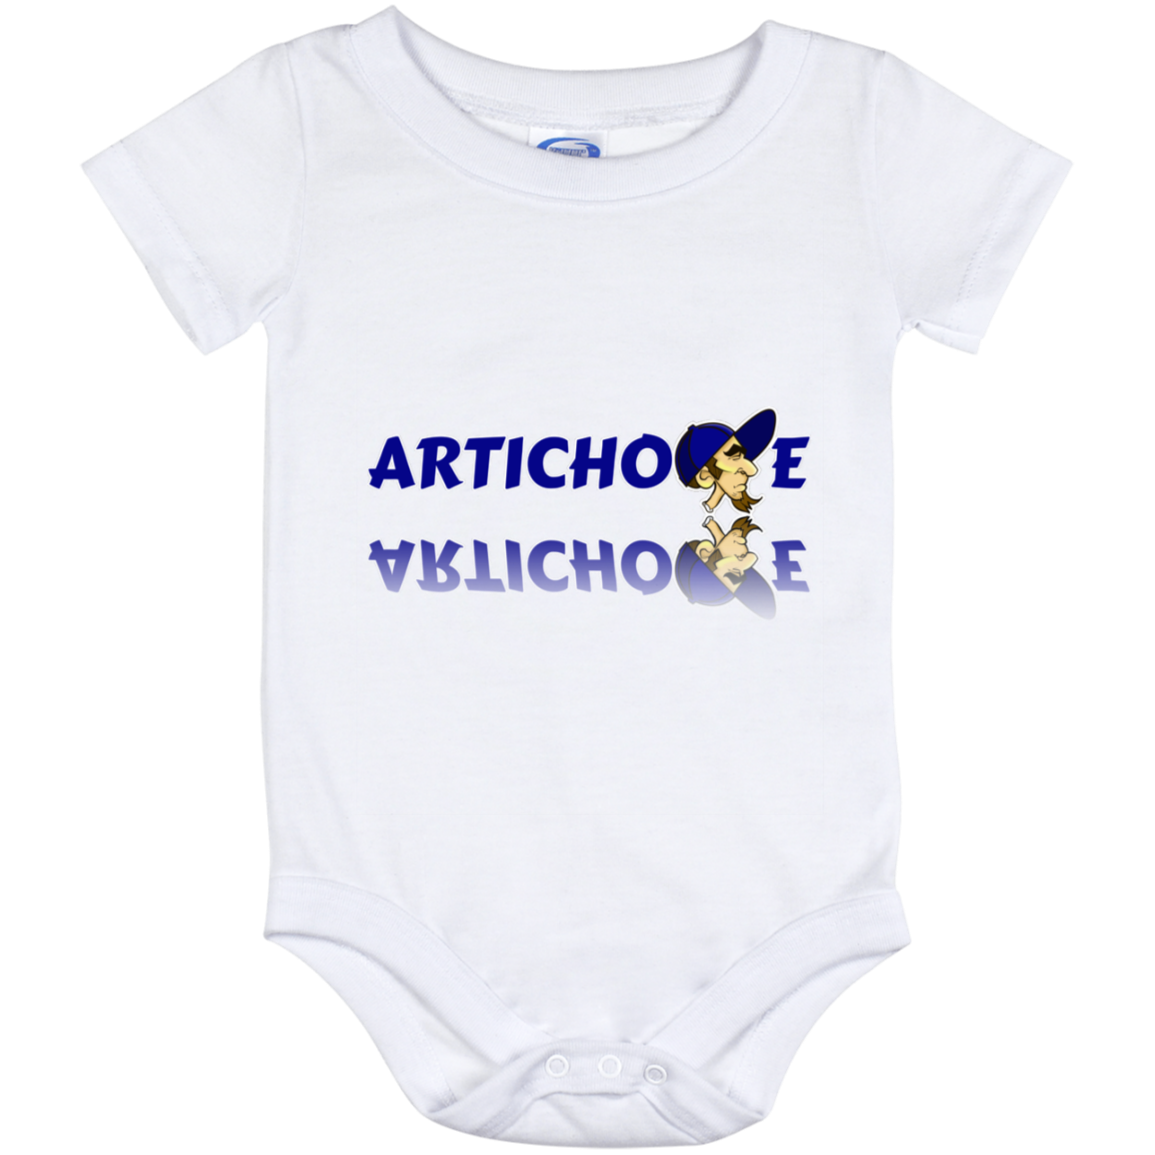 ZZ#20 ArtichokeUSA Characters and Fonts. "Clem" Let’s Create Your Own Design Today. Baby Onesie 12 Month